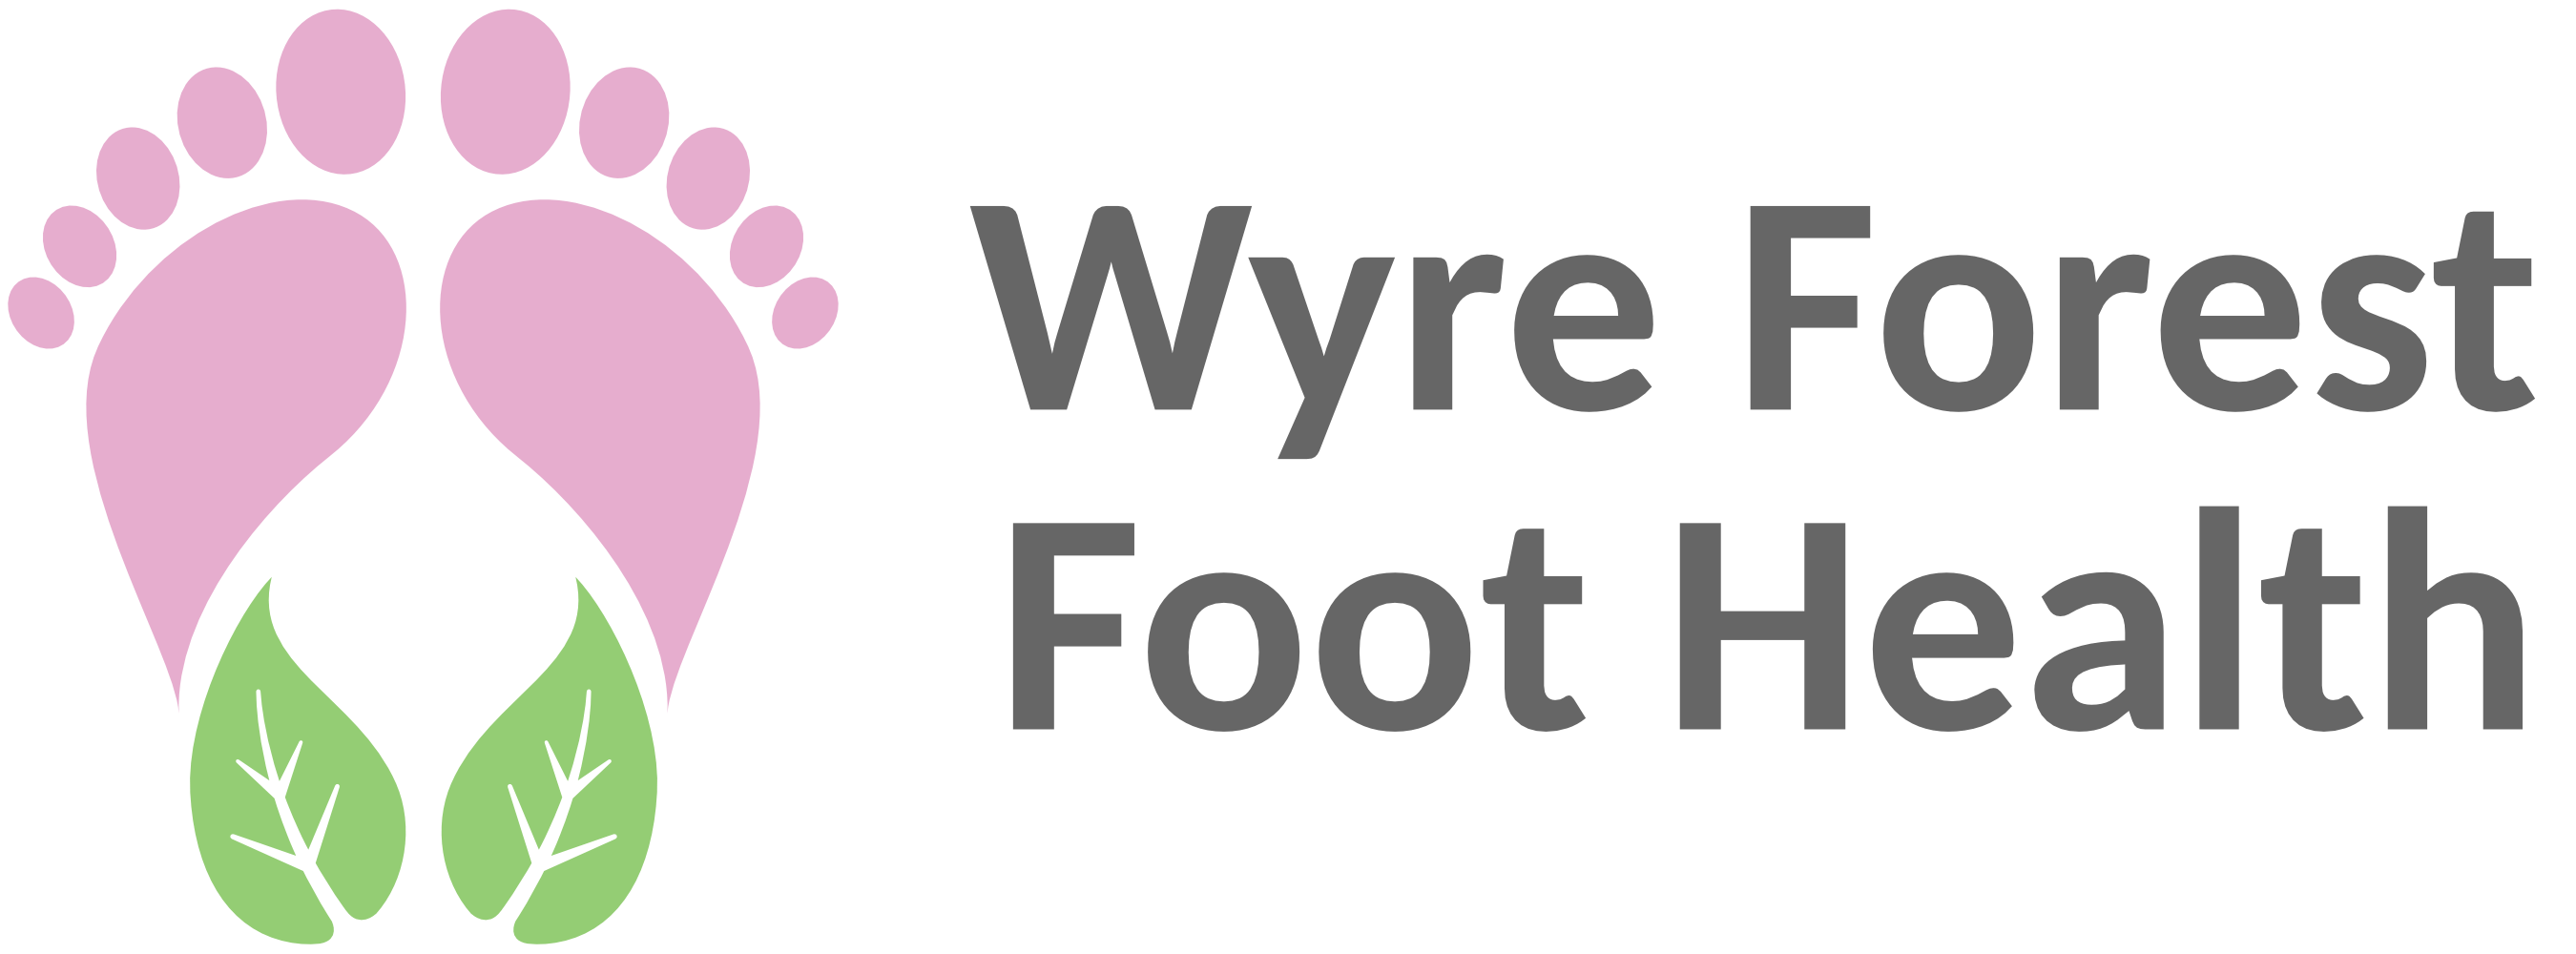 Wyre Forest Foot Health